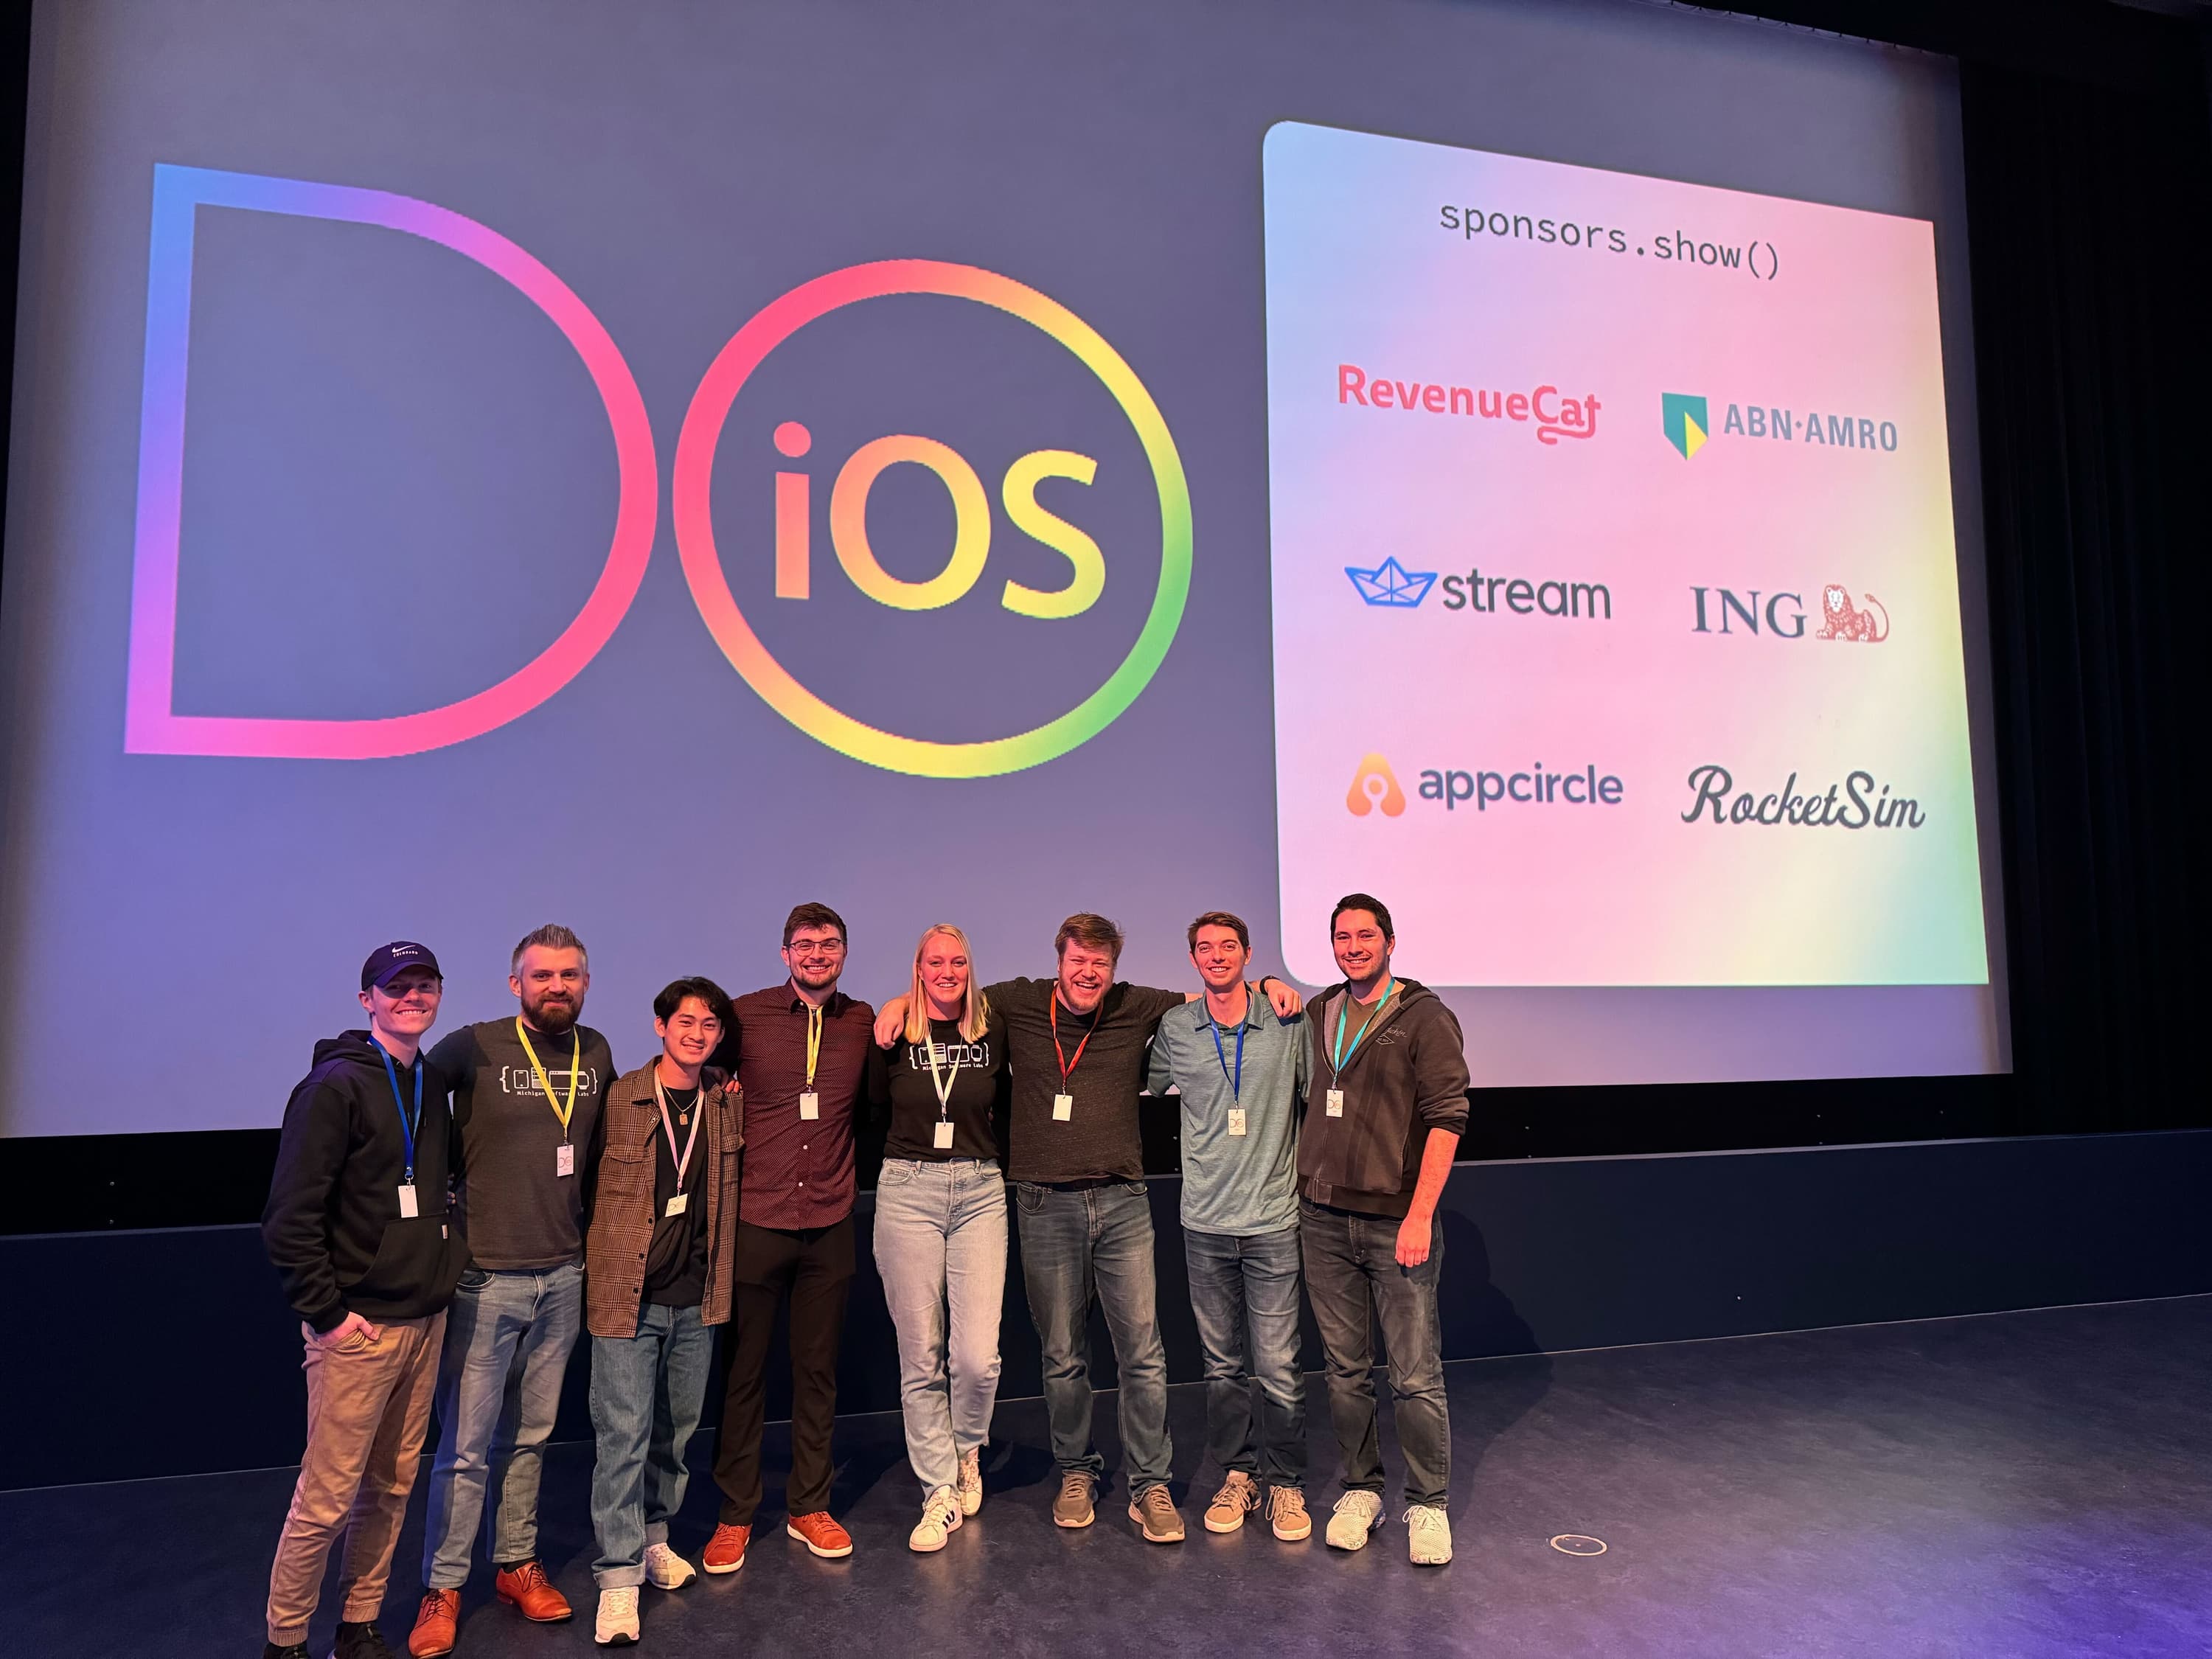 5 takeaways from the Do iOS conference that will benefit our clients